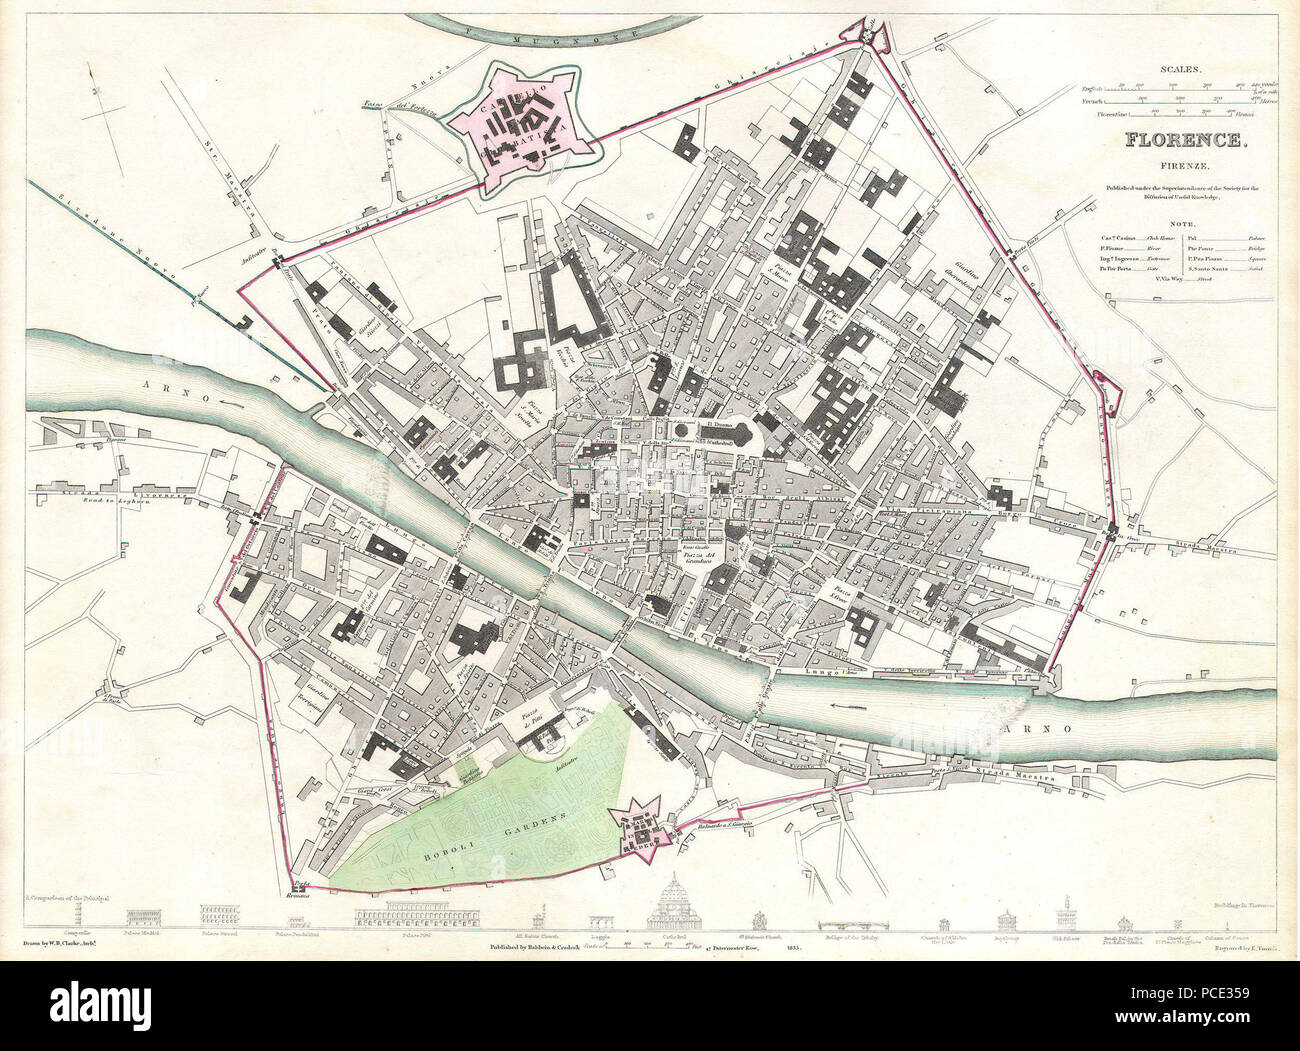 71835 S.D.U.K. Plan de la ville ou d'un Plan de Florence ou Firenze, Italie - Florence - Geographicus-SDUK-1835 Banque D'Images